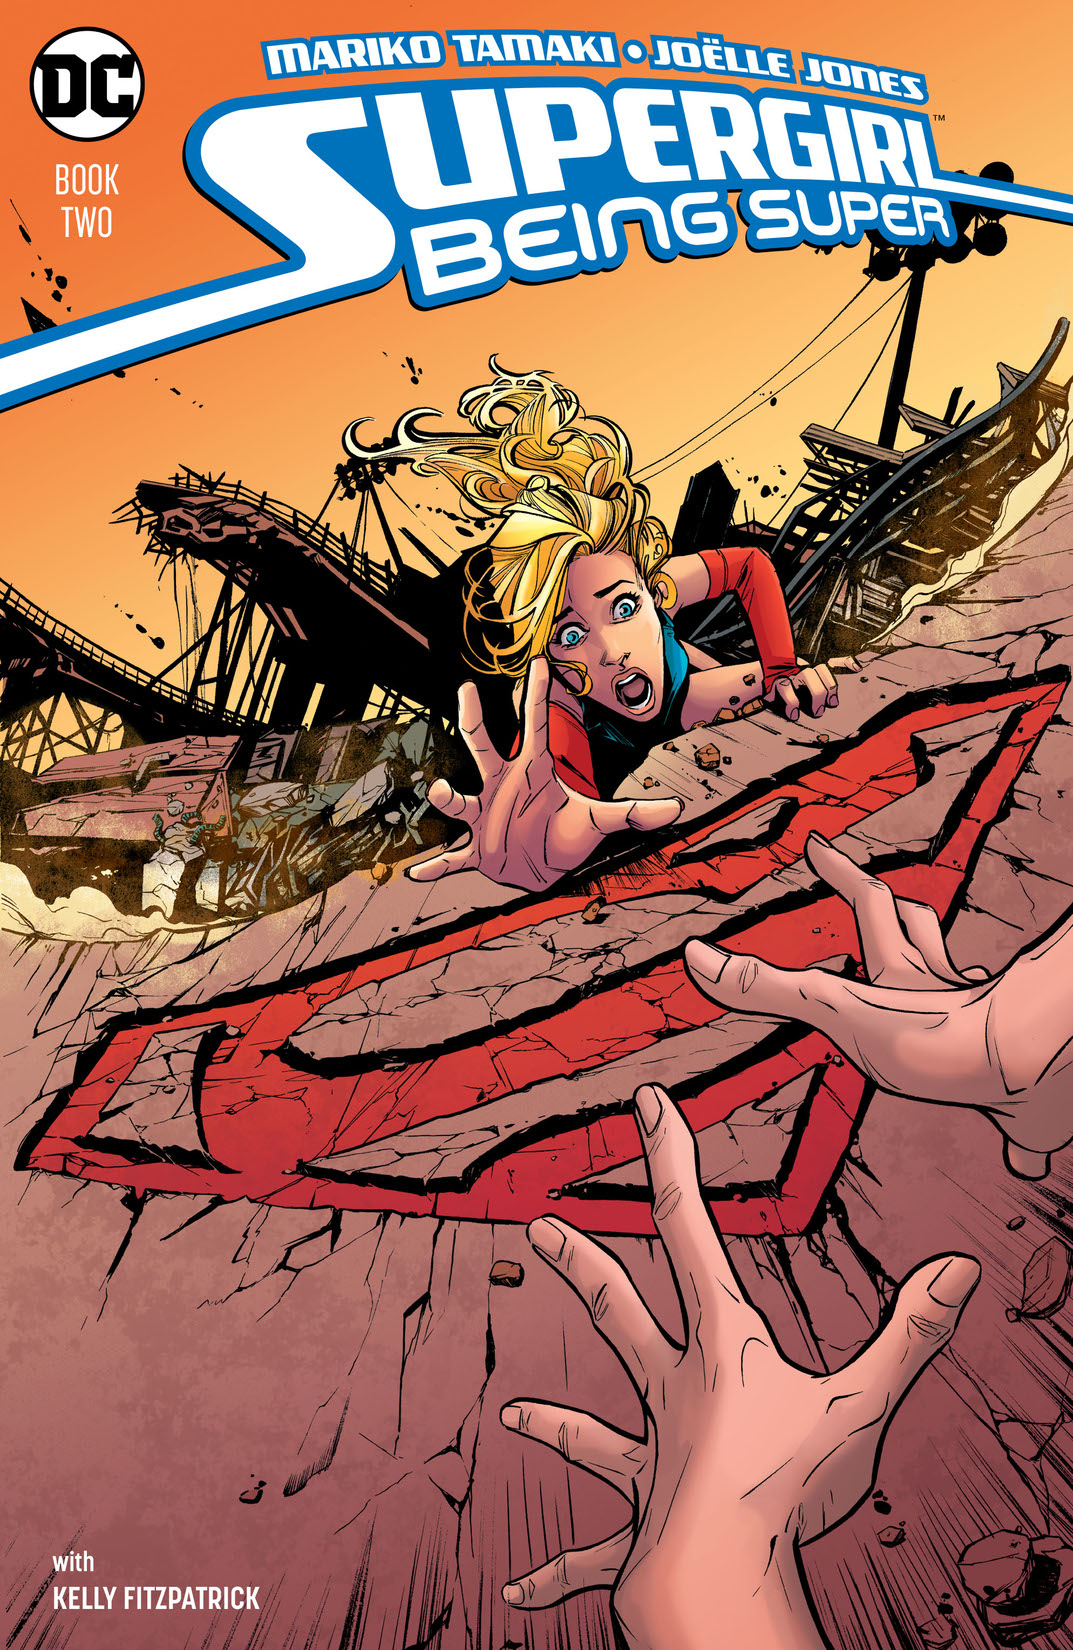 Supergirl: Being Super #2 preview images